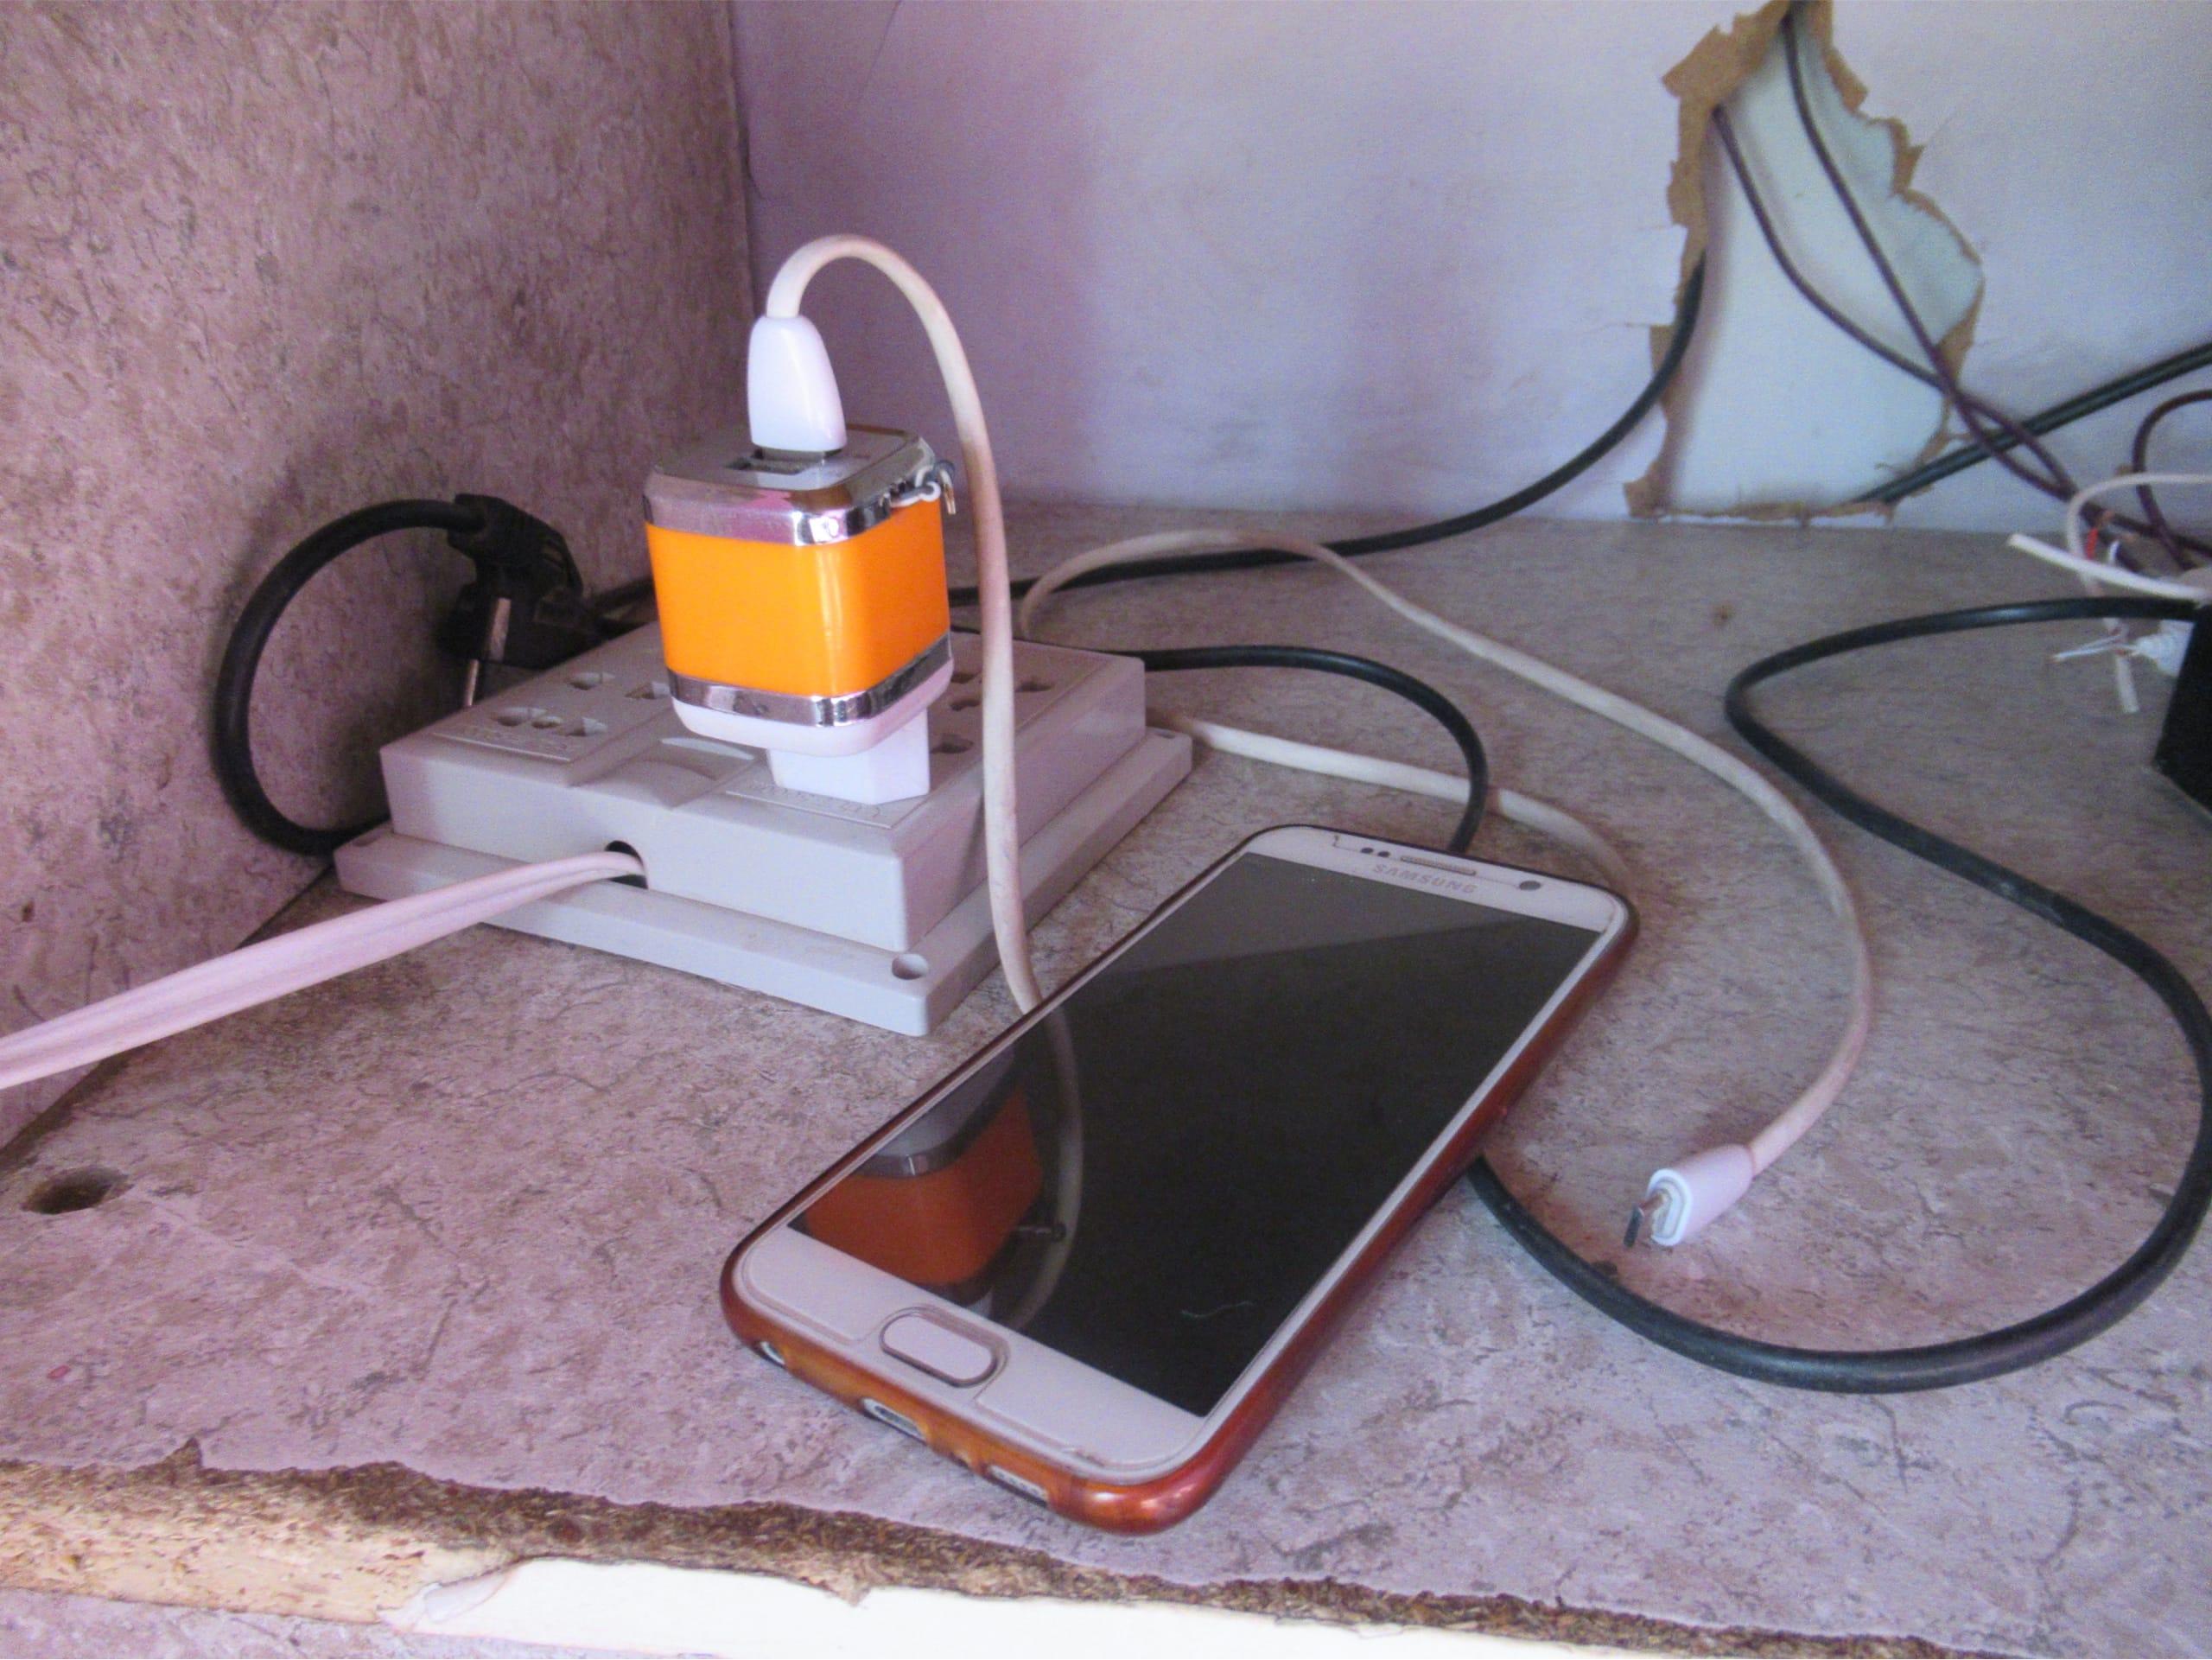 There is no way to charge a phone without having access to electricity.